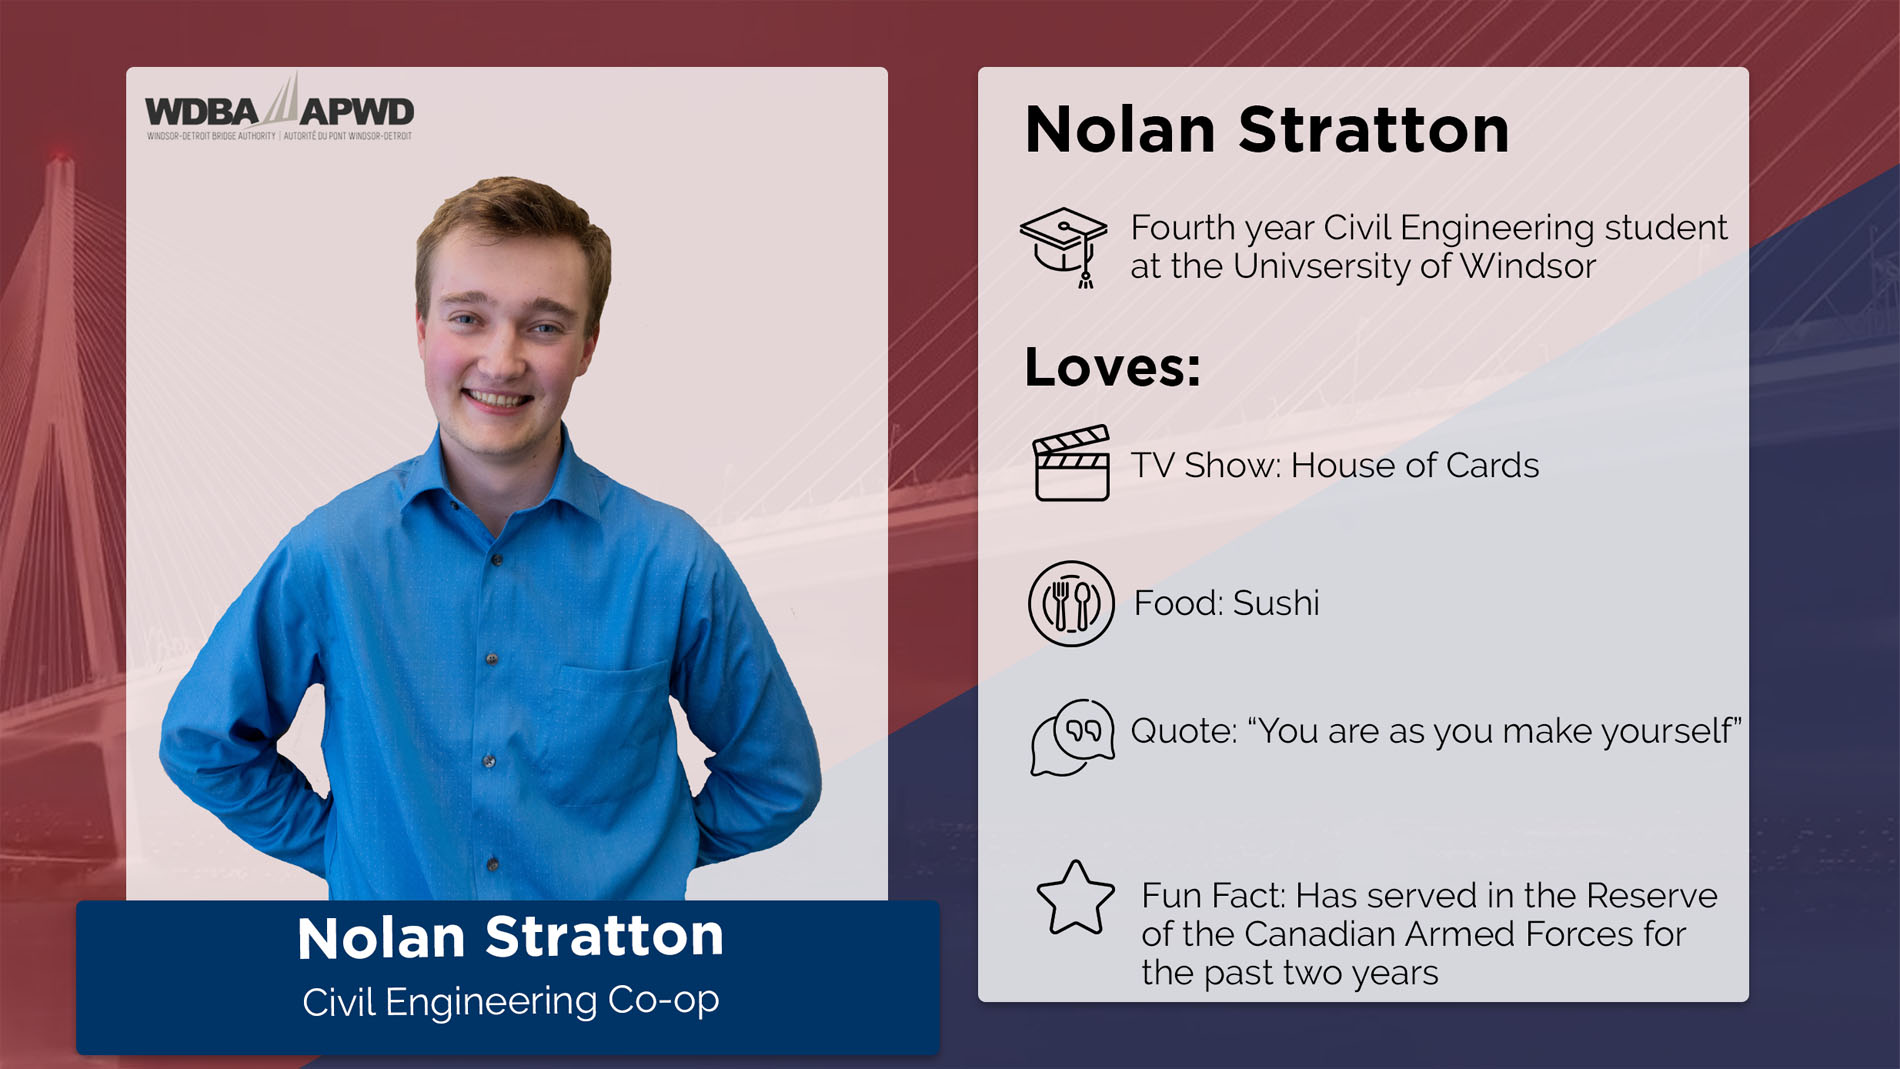 Nolan Stratton, Civil Engineering Co-op. Fourth year Civil Engineering student at the University of Windsor. Loves: TV Shows: House of Cards. Food: Sushi. Quote: "You are as you make yourself." Fun Fact: Has served in the Reserve of the Canadian Armed Forces for the past two years. 